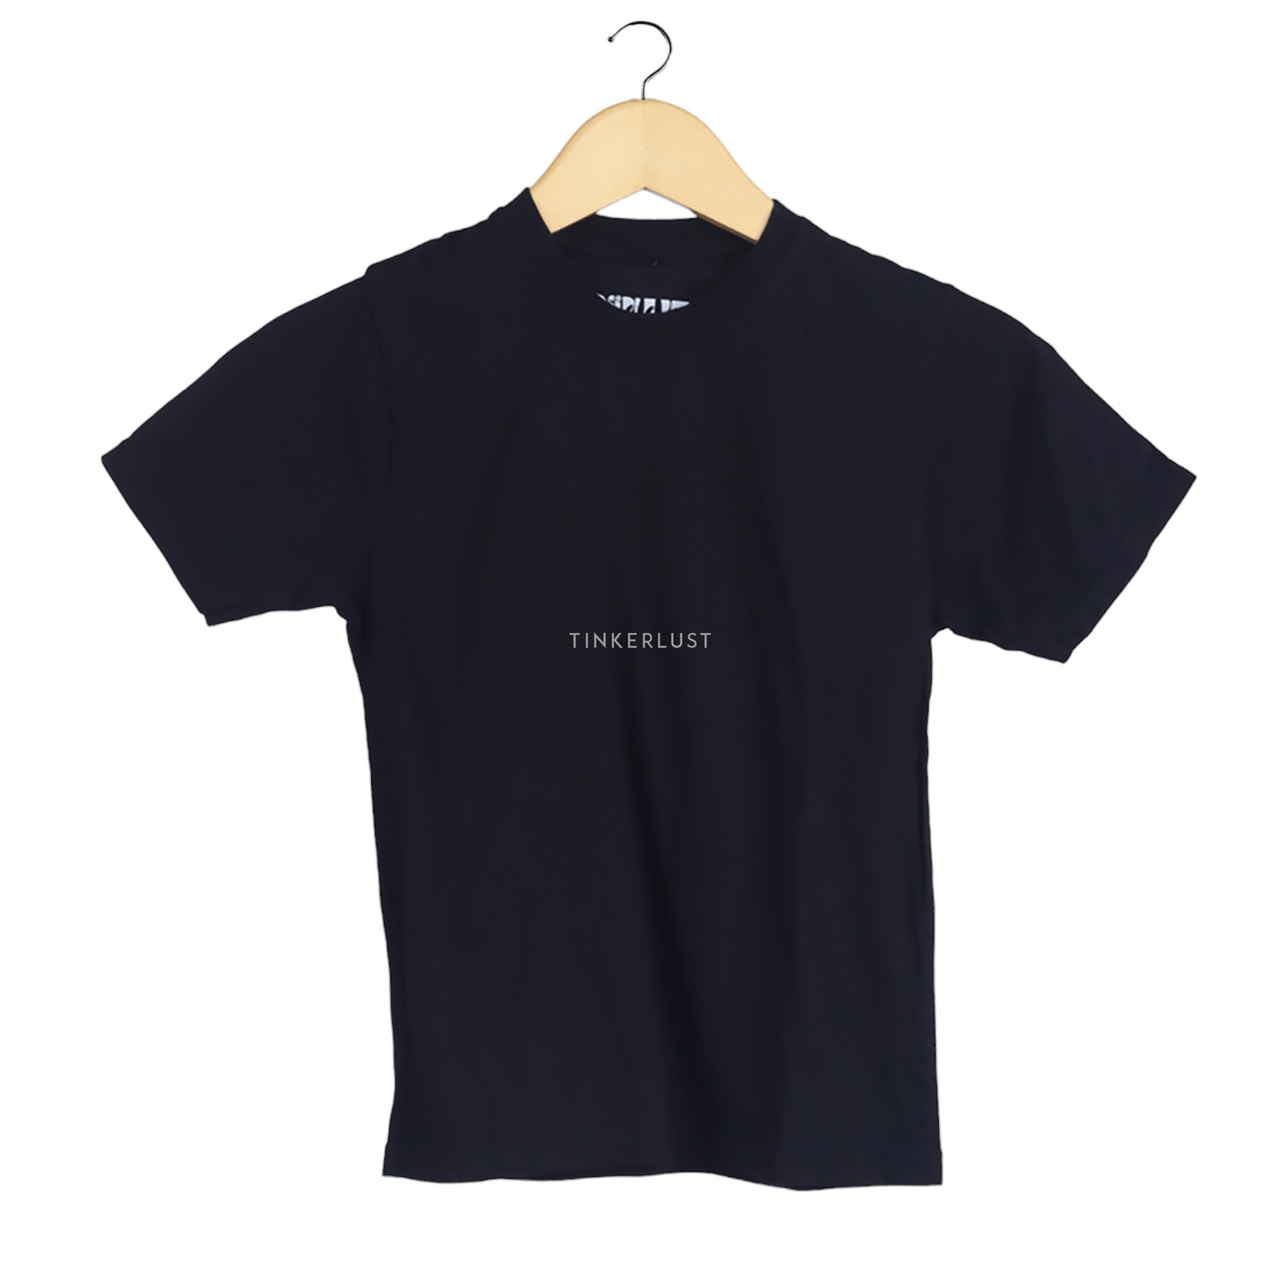 Private Collection Black T-shirt